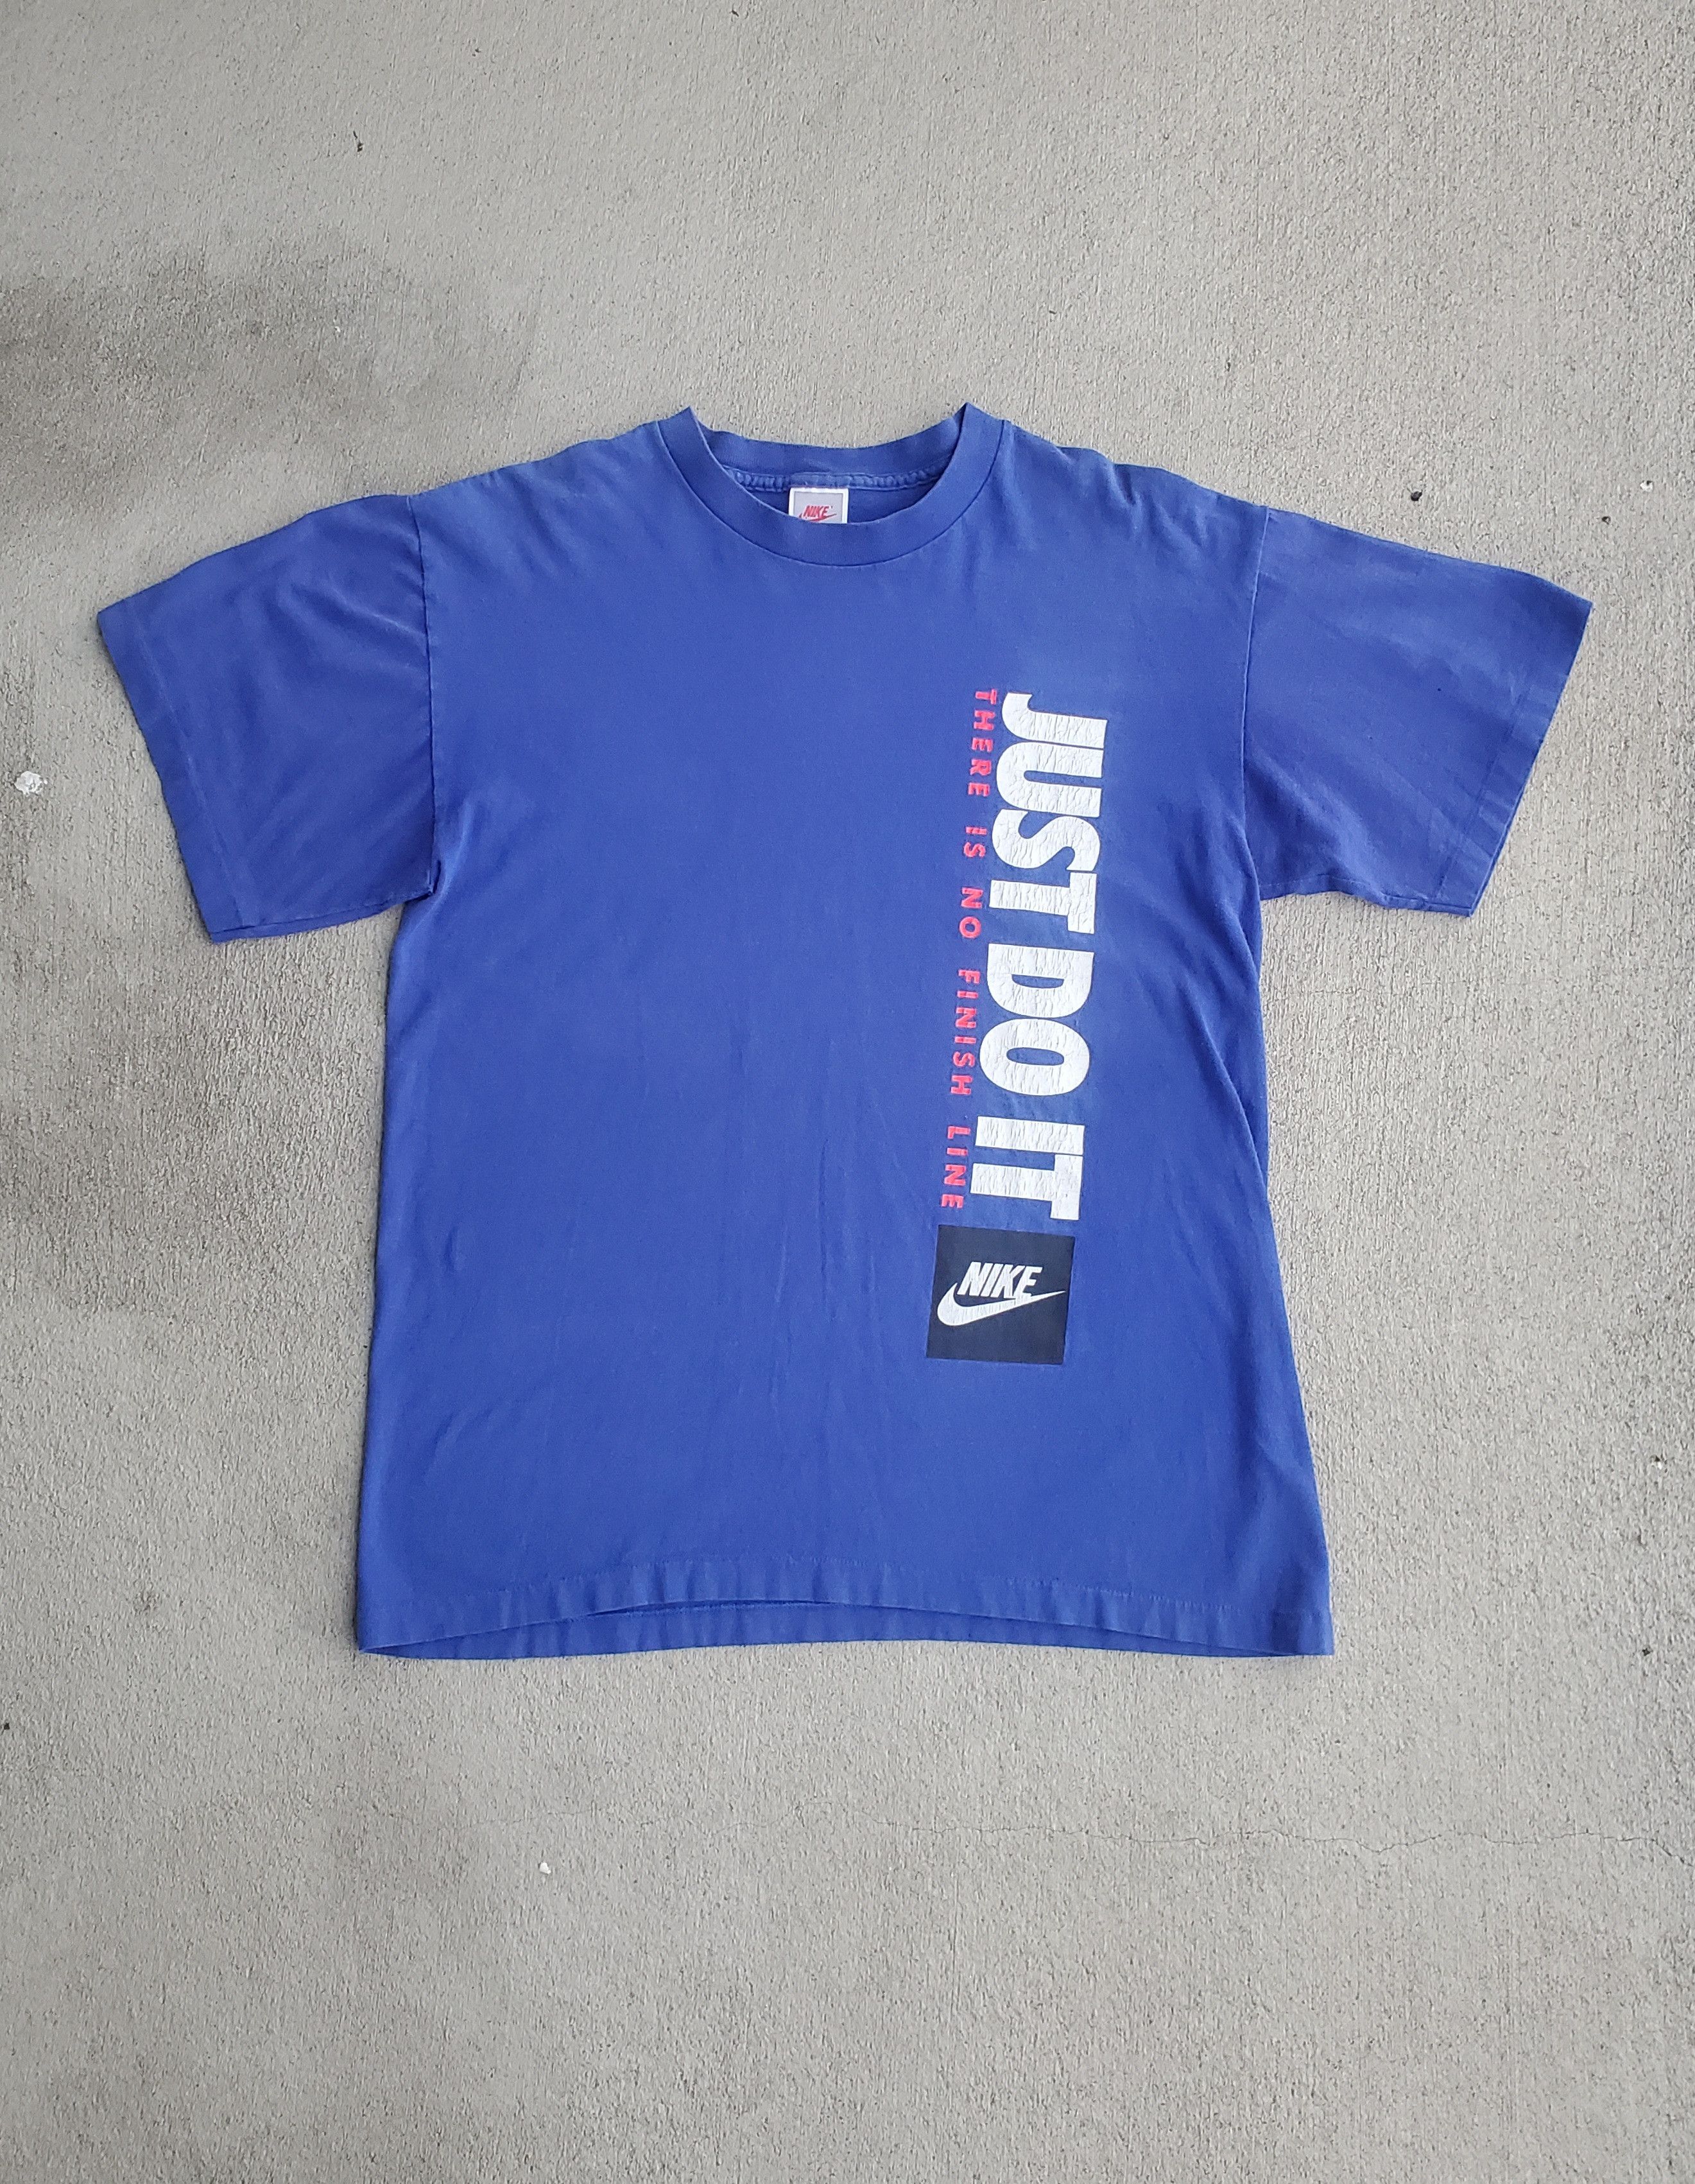 Nike Vintage Late 80s/Early 90s Nike Single Stitch T Shirt Size US M / EU 48-50 / 2 - 1 Preview